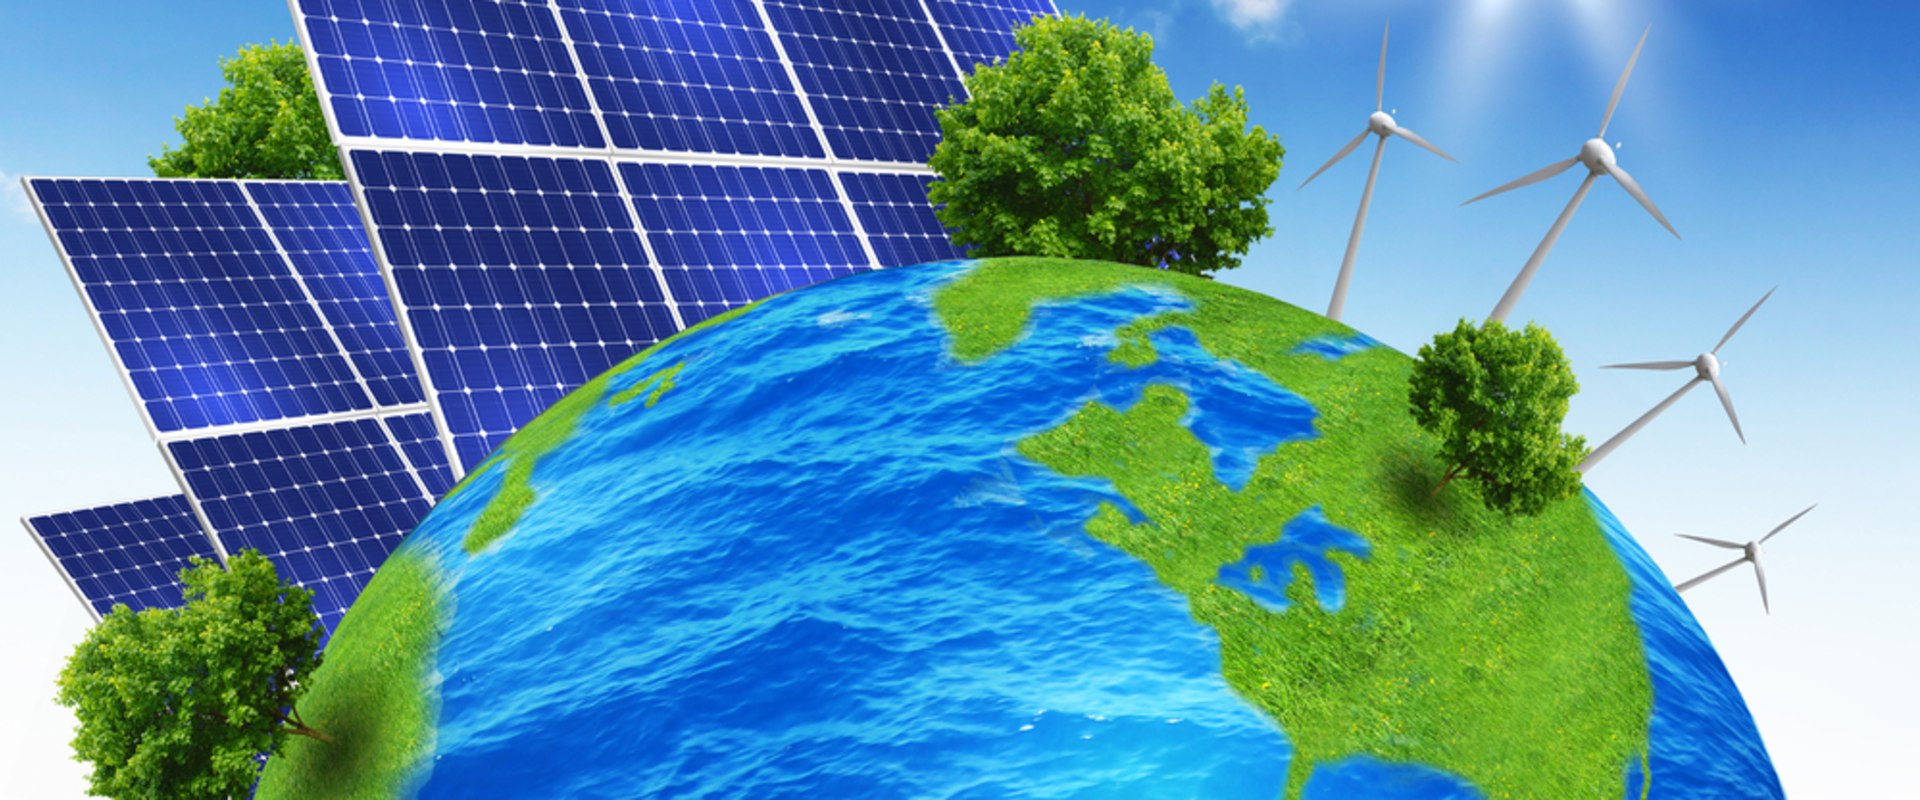 The Benefits of Solar Energy for the Environment